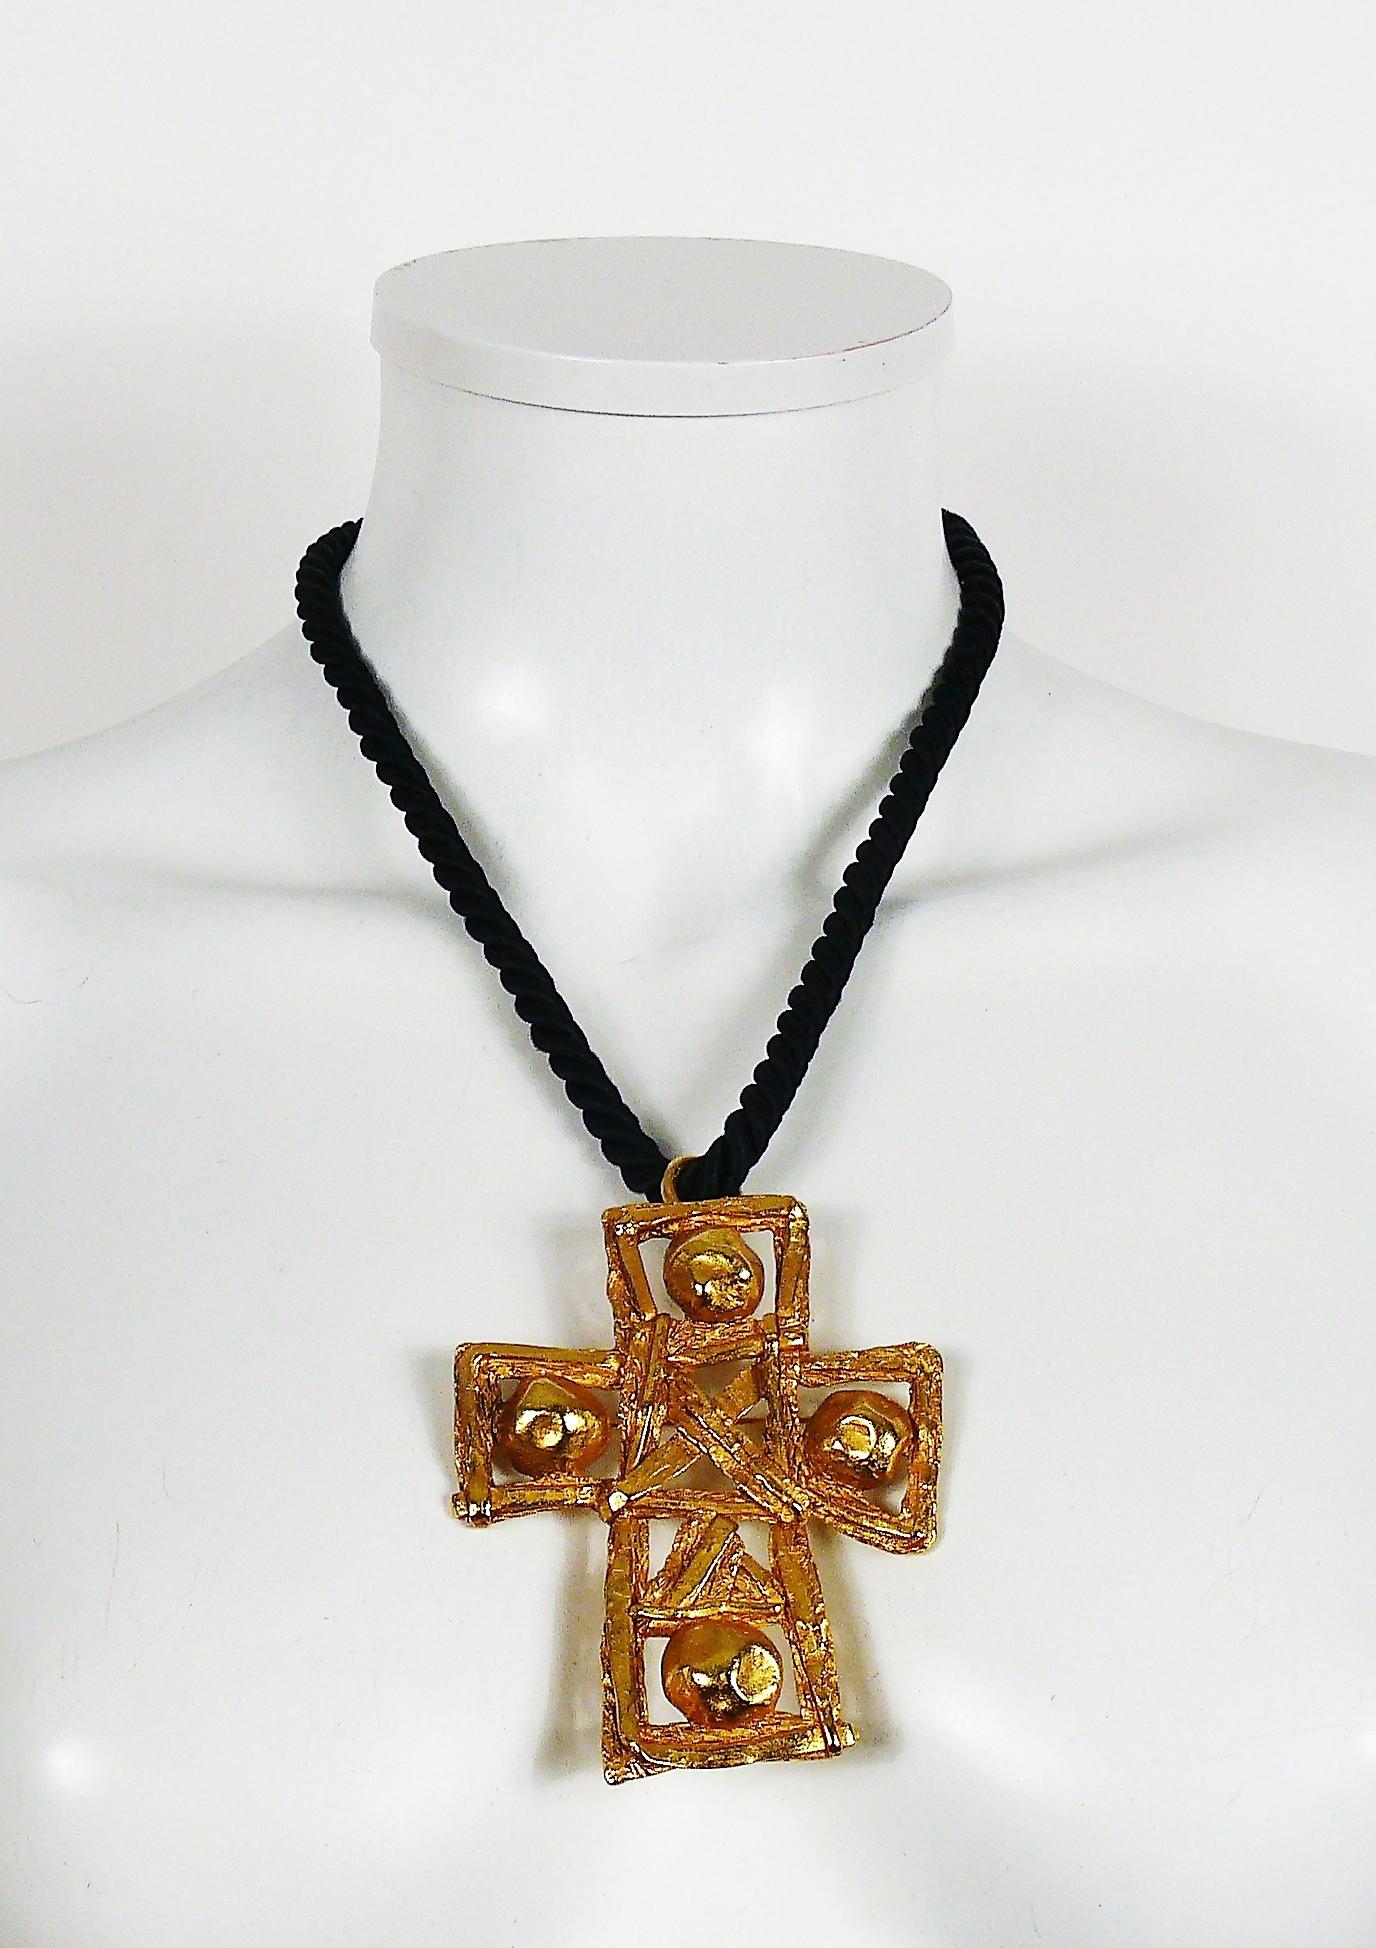 CHRISTIAN LACROIX vintage chunky textured gold toned openwork cross pendant with a black satin twisted rope cord.

The cross can be used as a brooch or pendant.

Hook clasp.

Marked CHRISTIAN LACROIX CL Made in France.
Embossed CL monogram on the